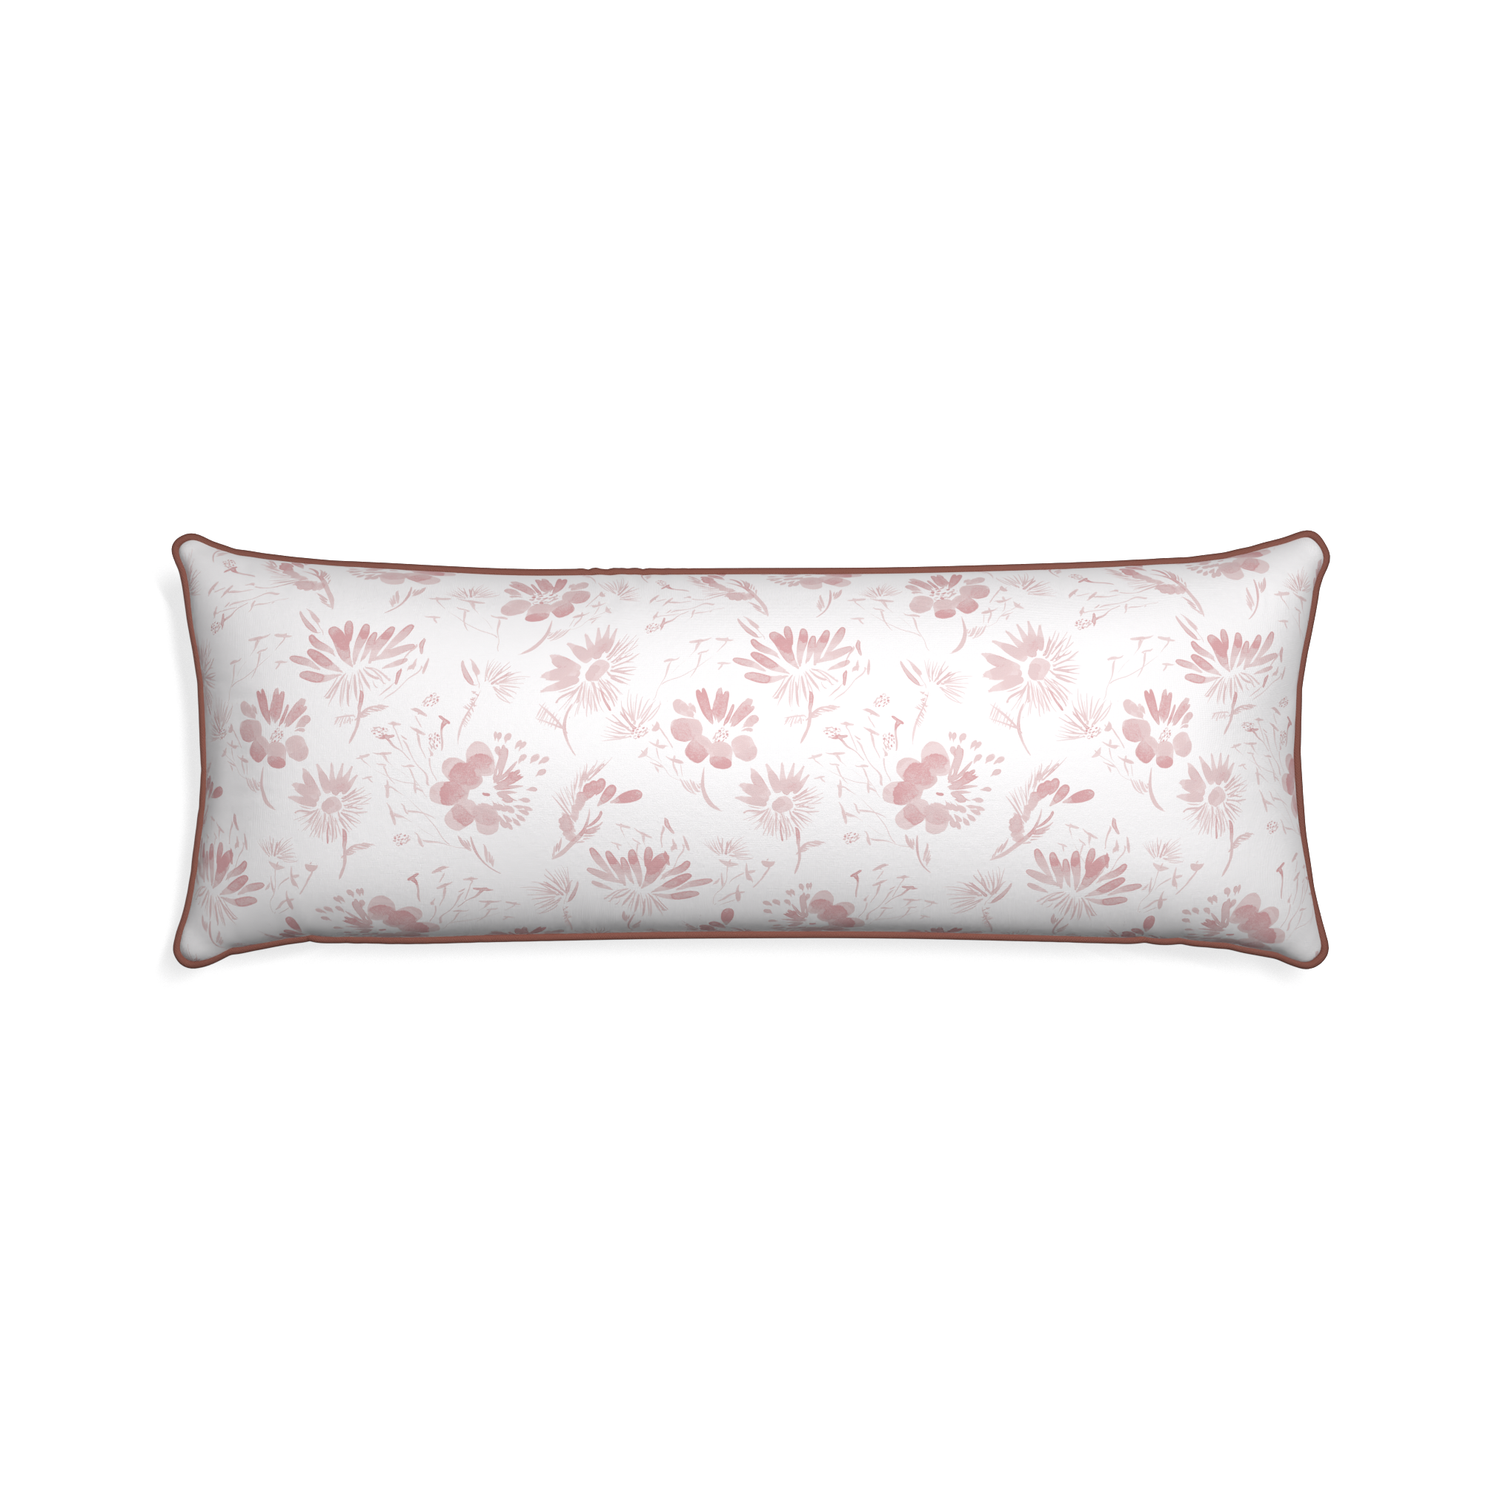 Xl-lumbar blake custom pink floralpillow with w piping on white background